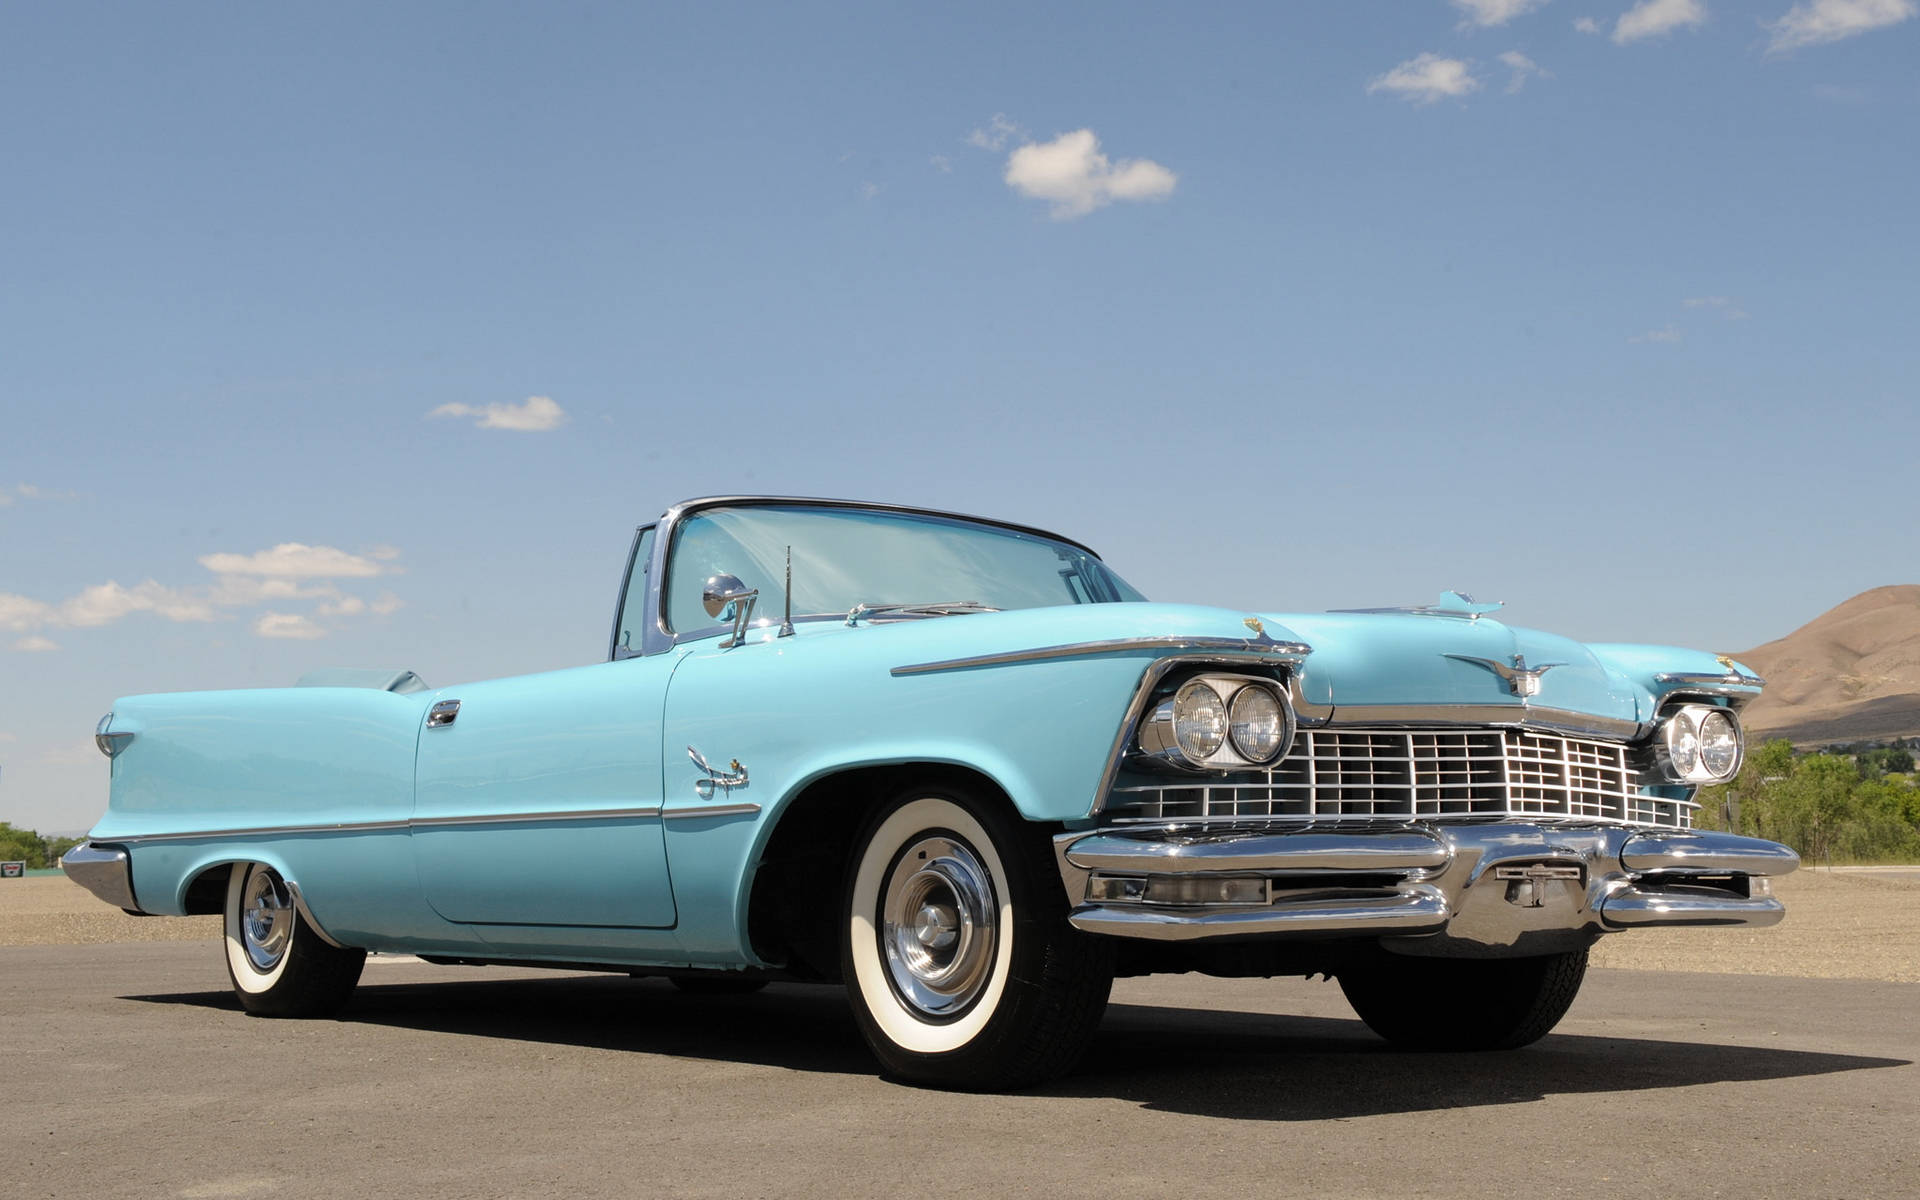 Exquisite 1958 Chrysler Imperial Convertible